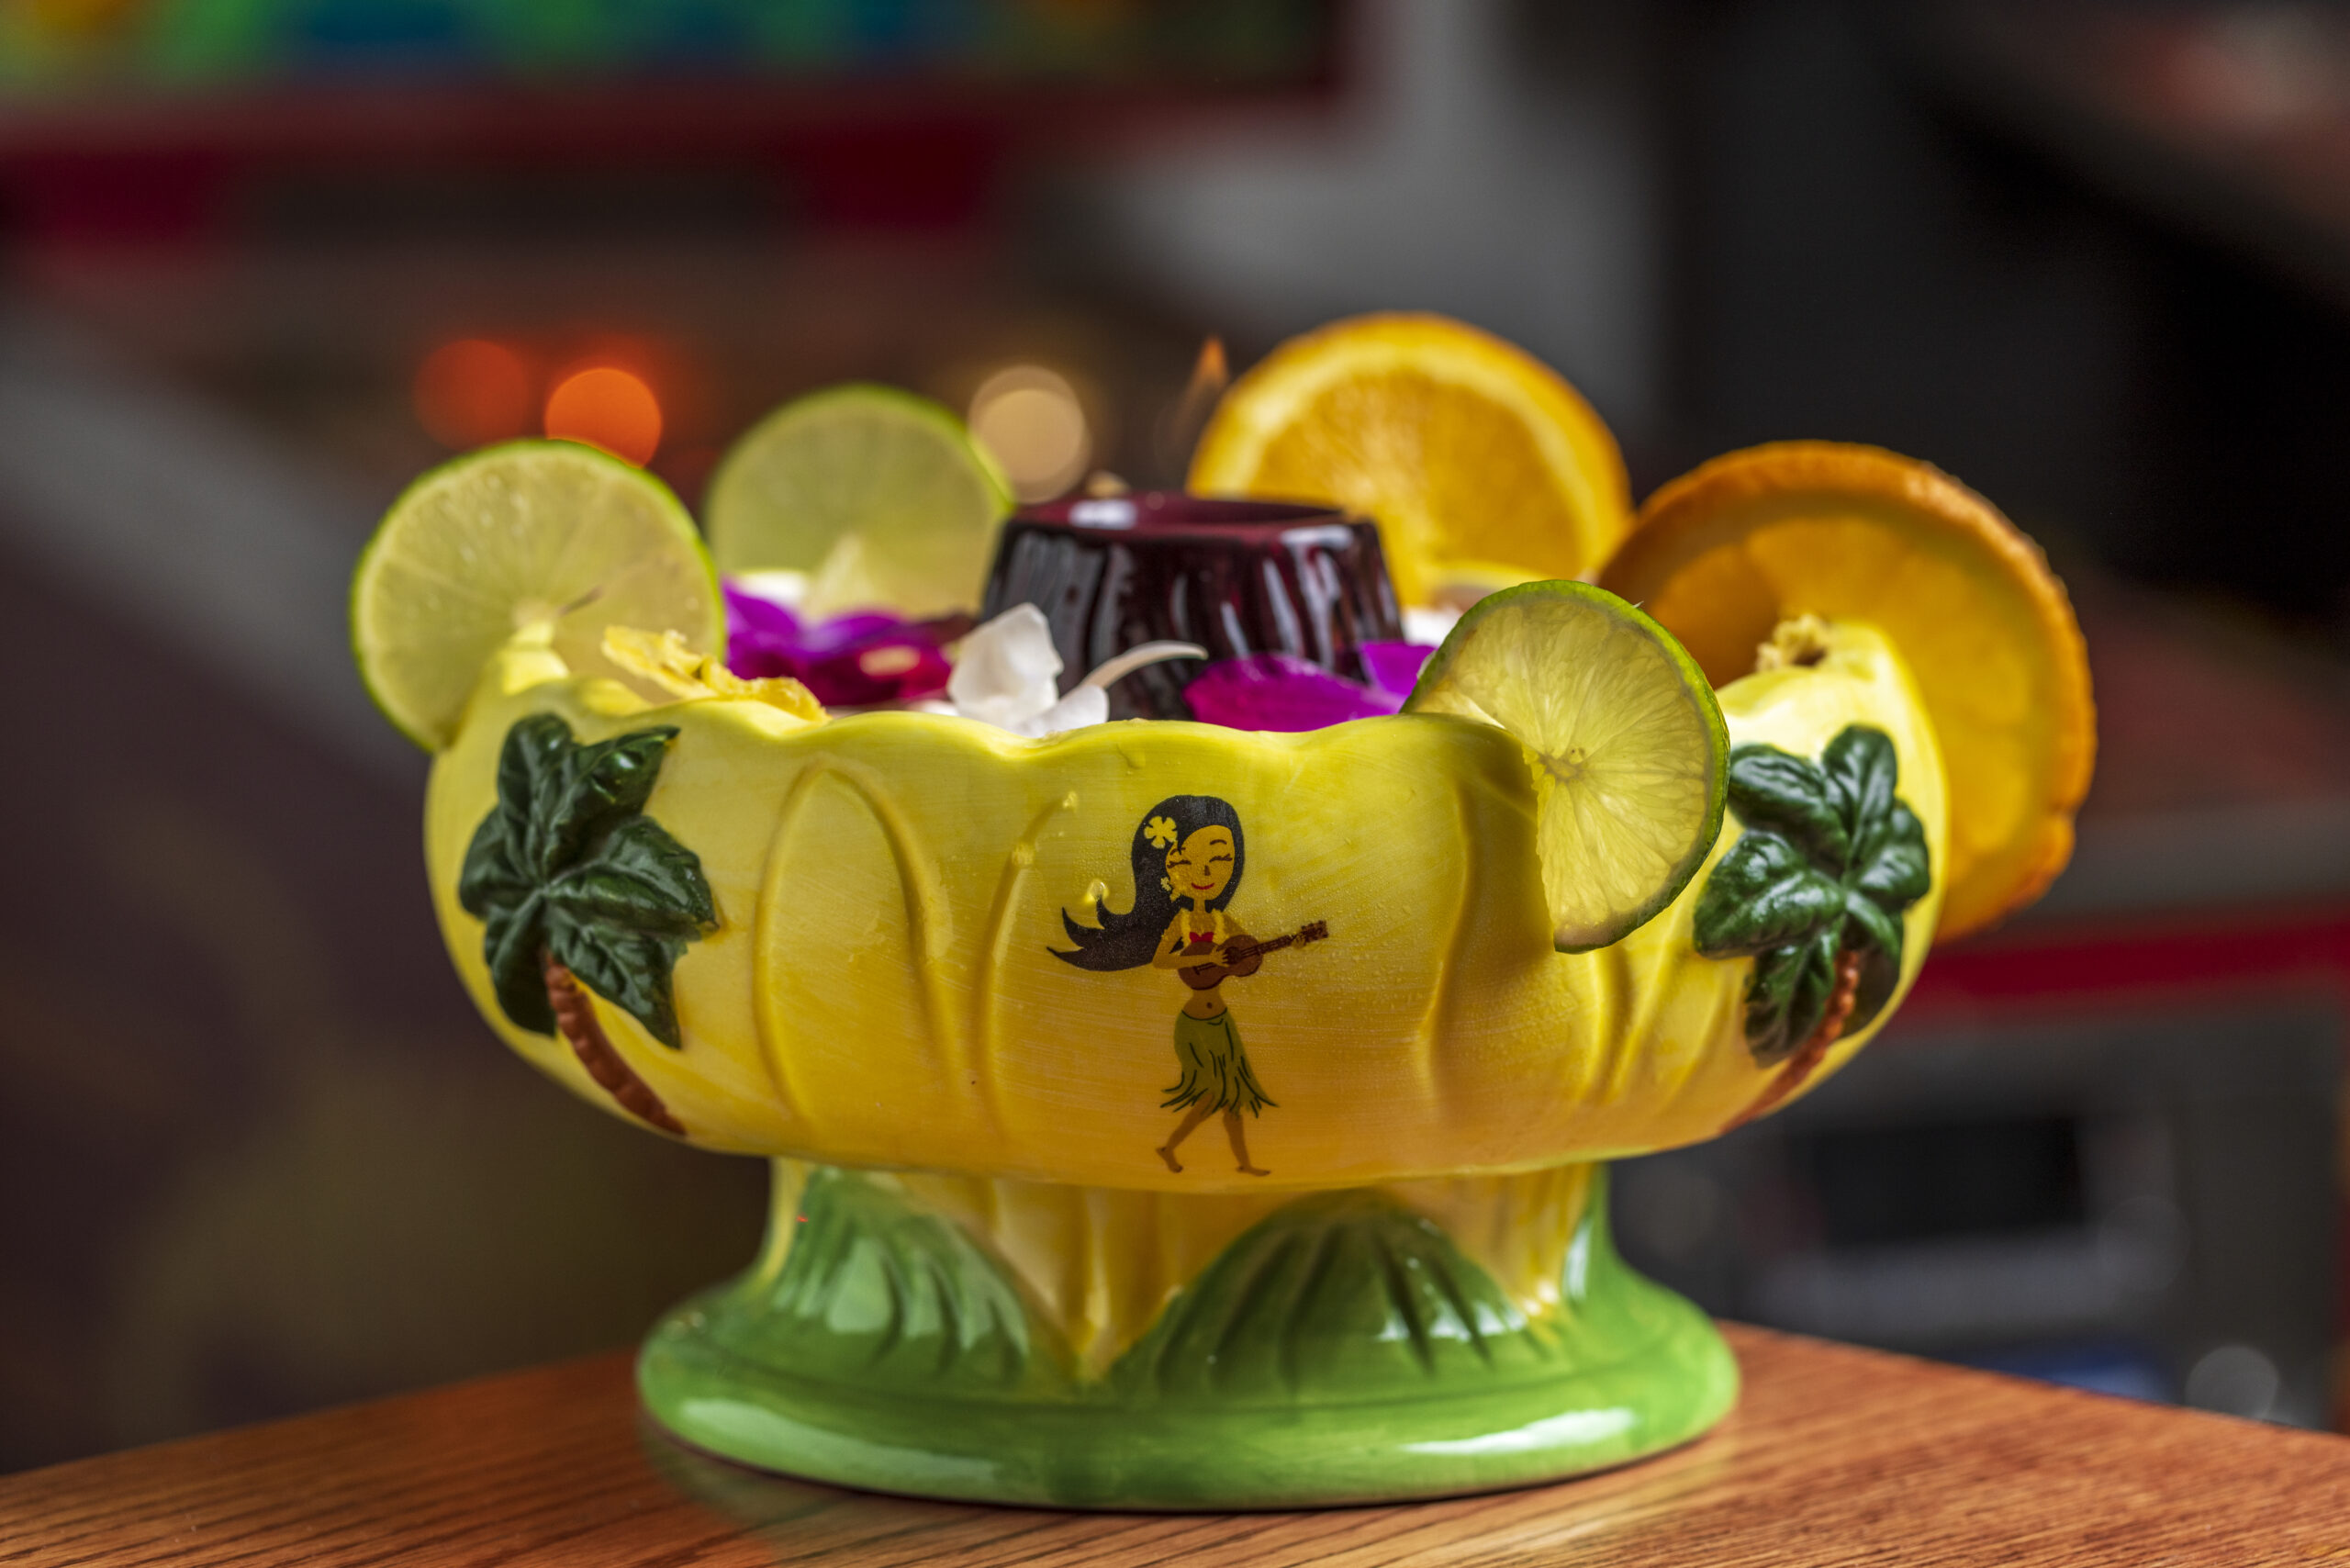 An image of the Scorpion Bowl cocktail from GIN RUMMY.